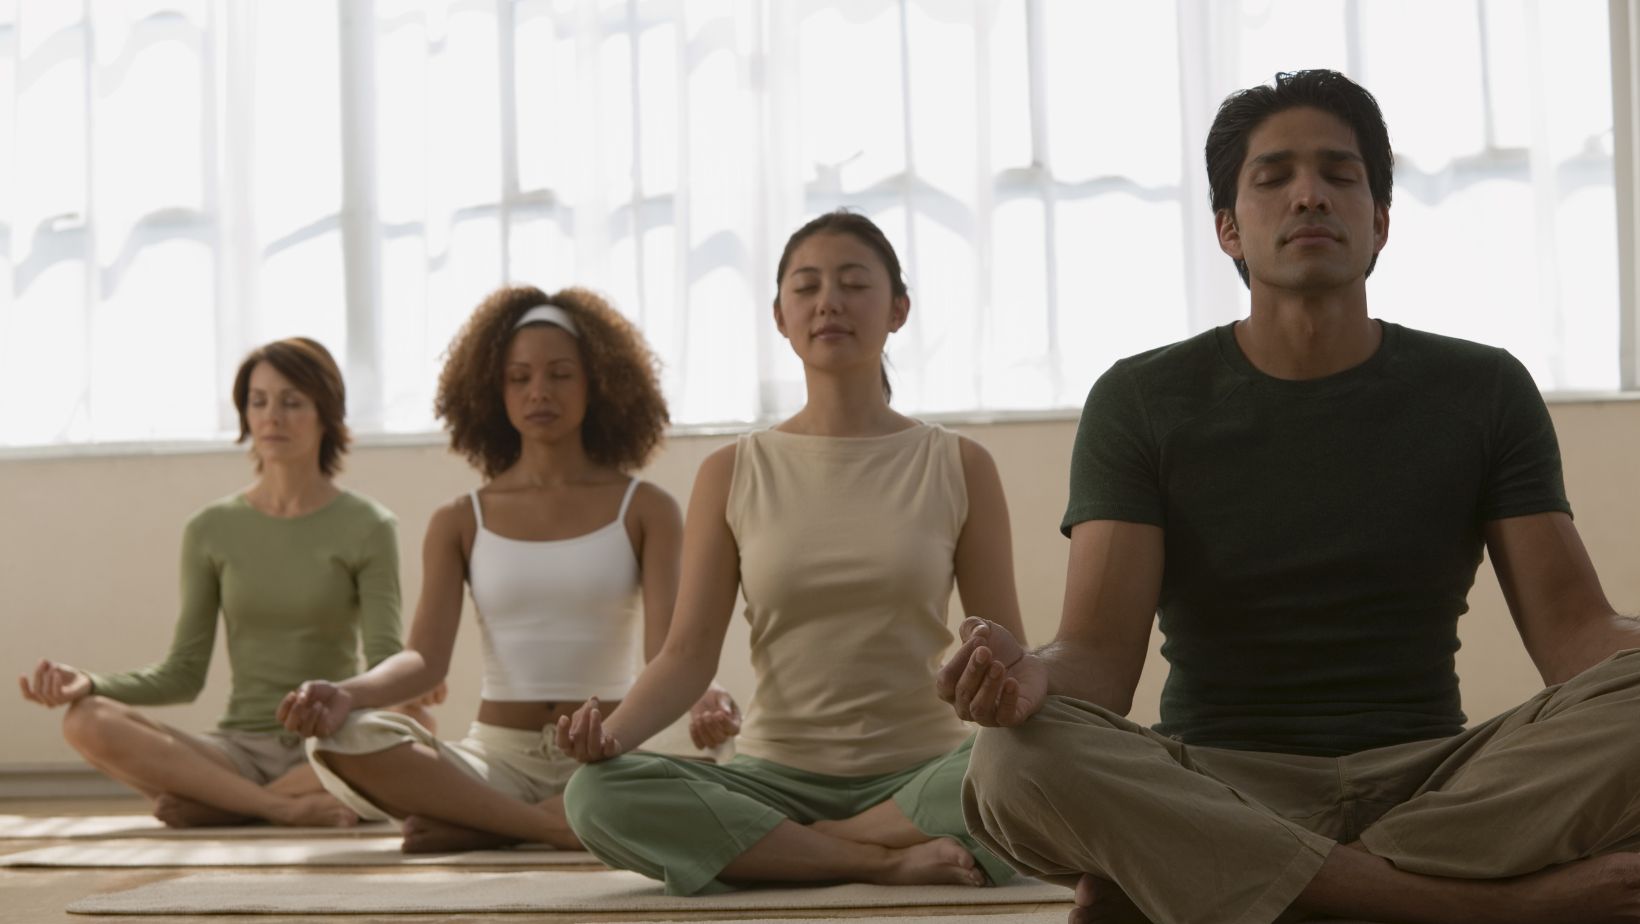 Men and women in a group meditation or yoga class